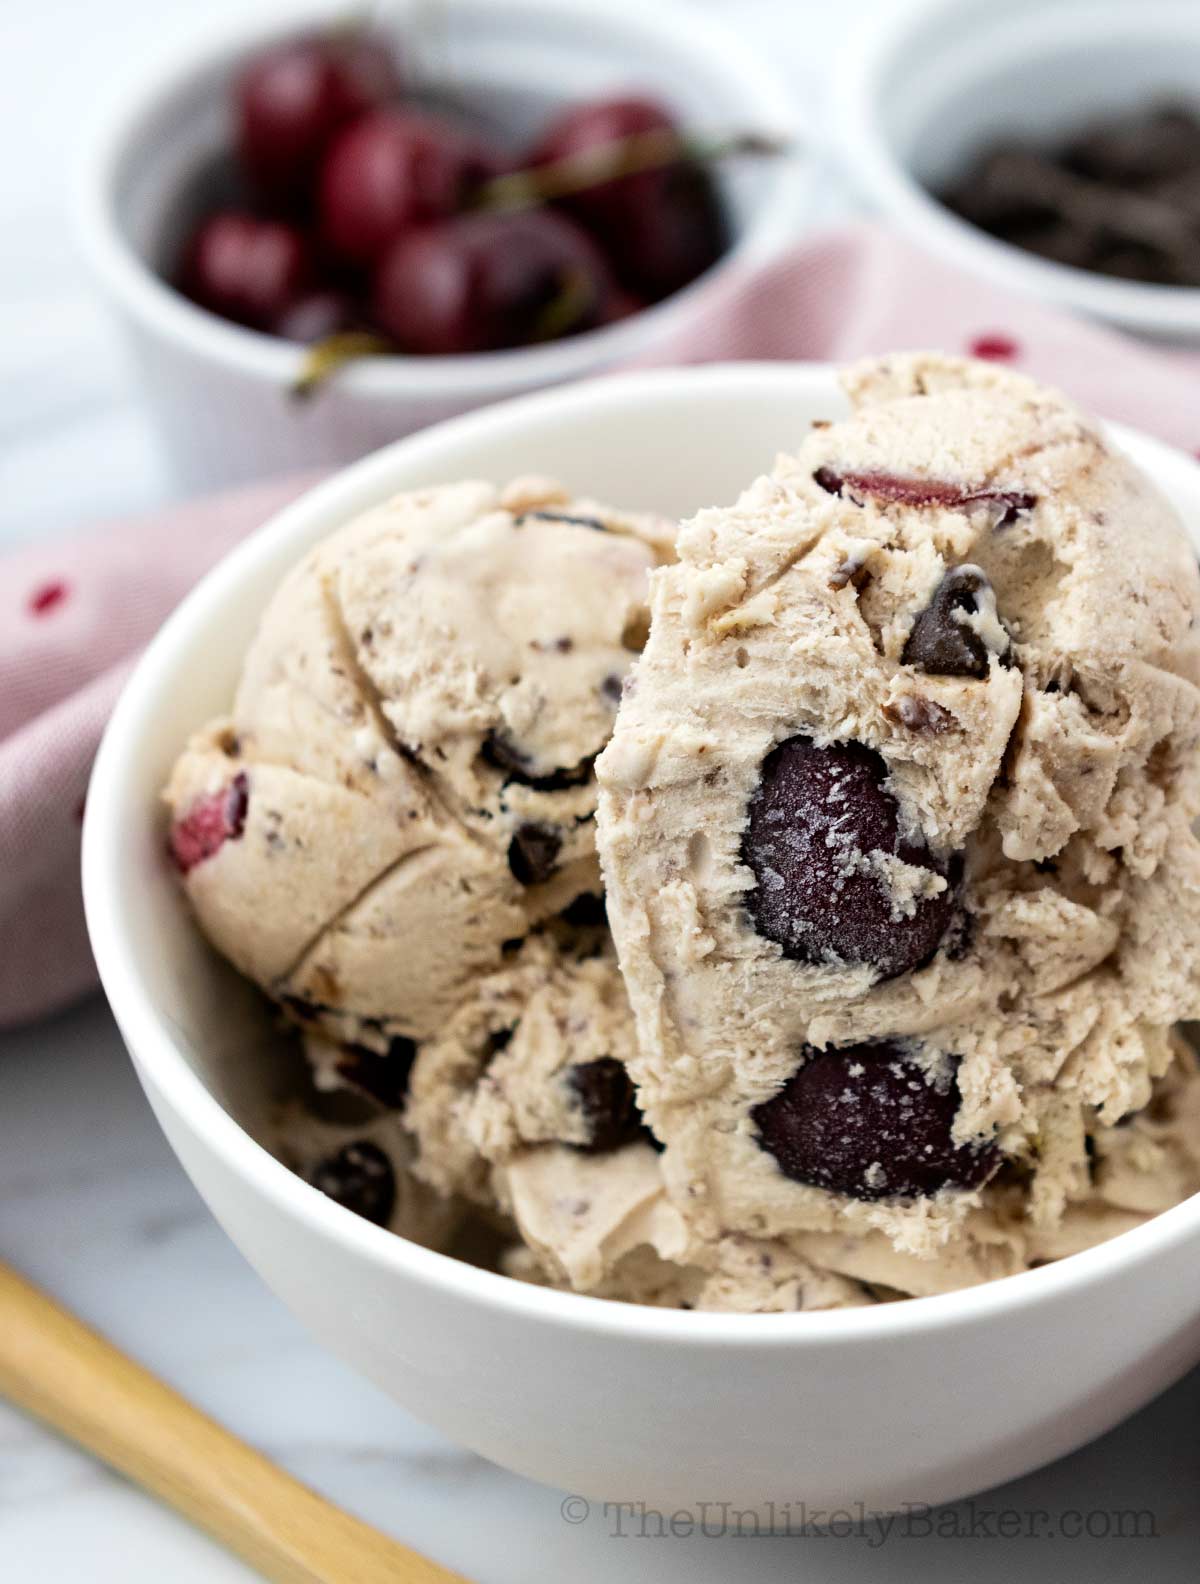 Scoop of chocolate cherry ice cream in a bowl.